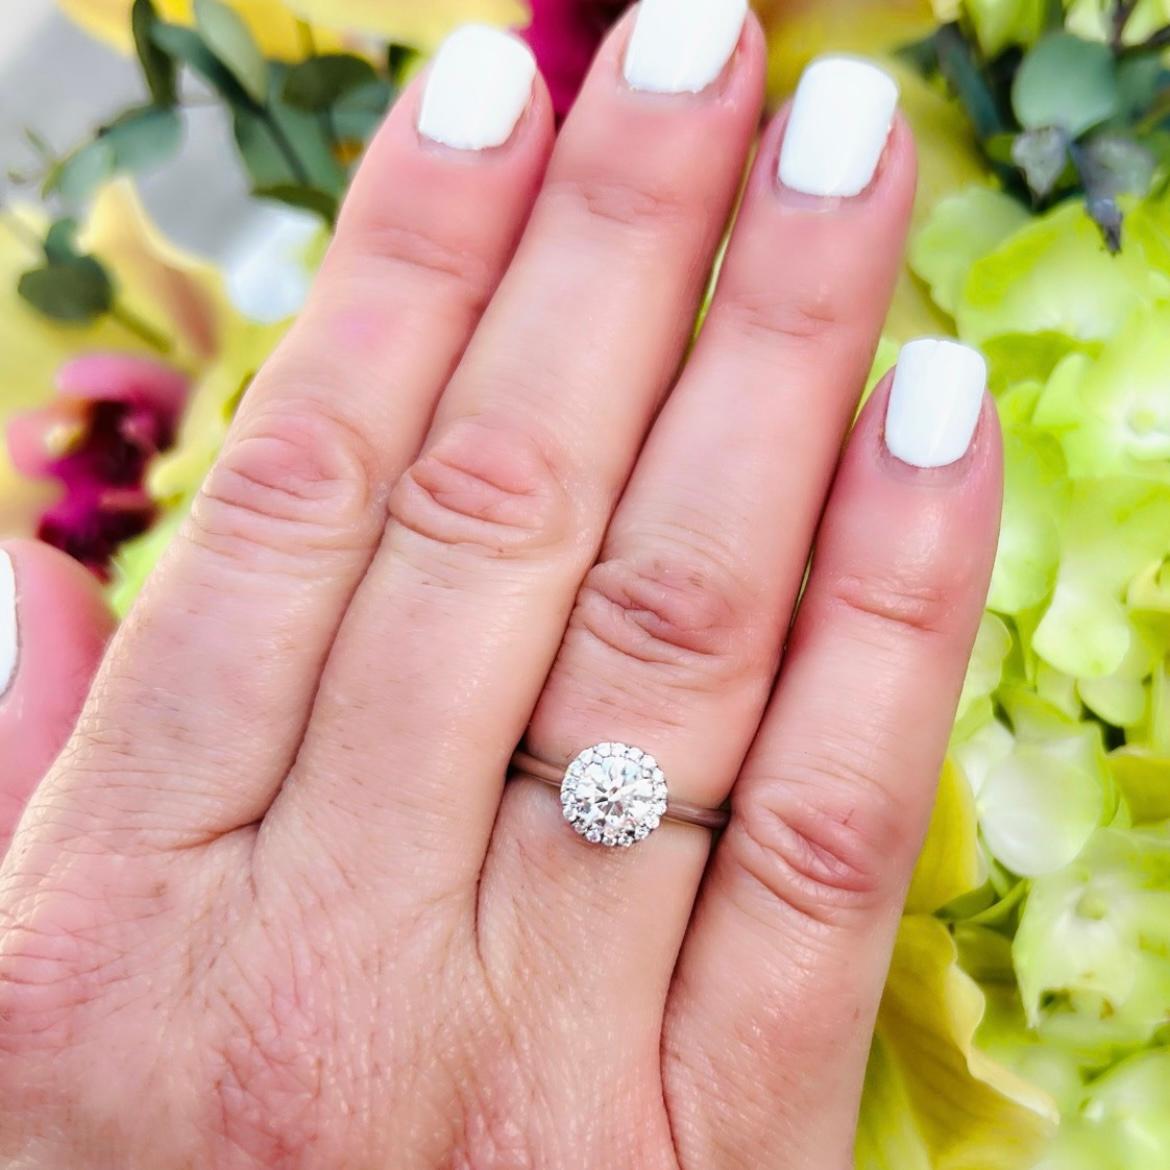 Clean and classic design meets exceptional fine diamonds in this gorgeous platinum diamond engagement ring. Featuring a round brilliant cut diamond at its center that weighs 0.80 carats and has been graded by the GIA as F/VS2 with an Excellent Cut